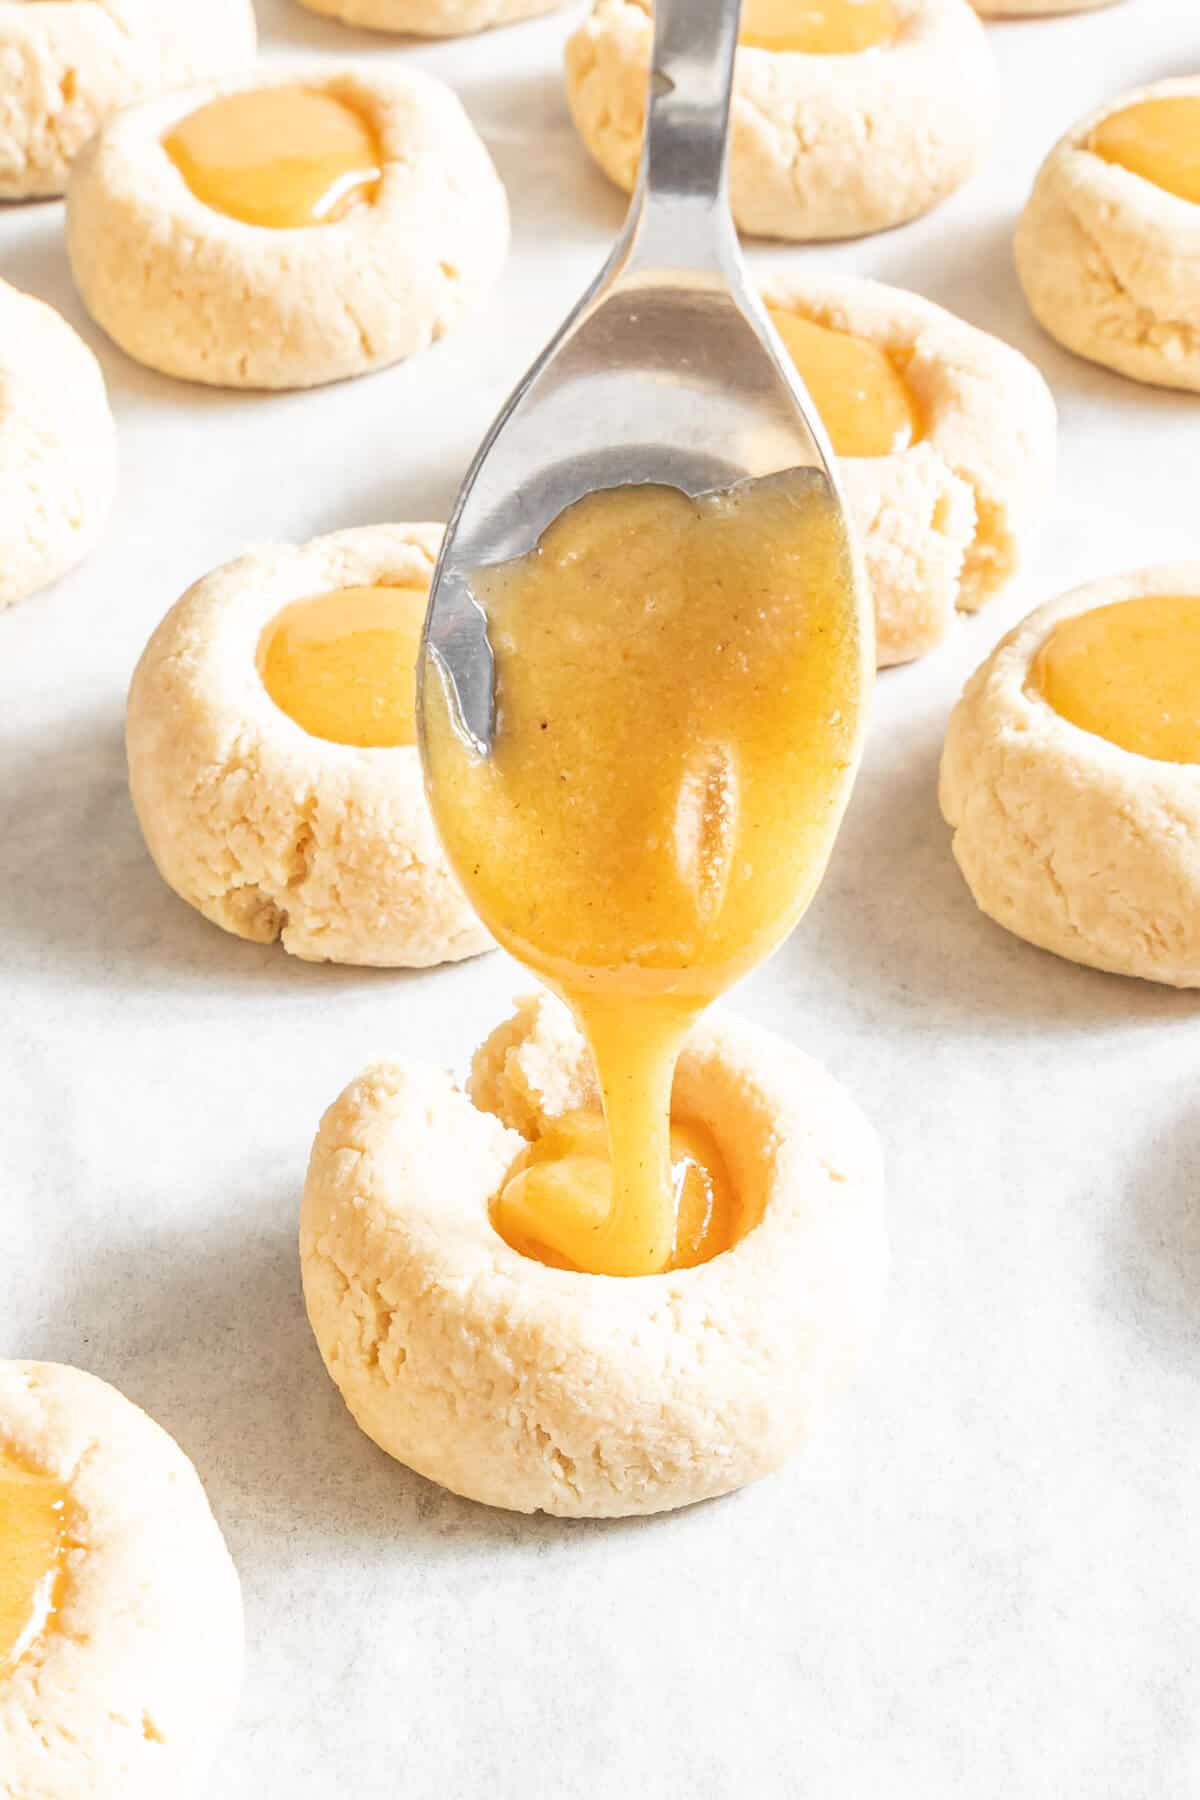 spooning caramel into the center of the thumbprint cookies